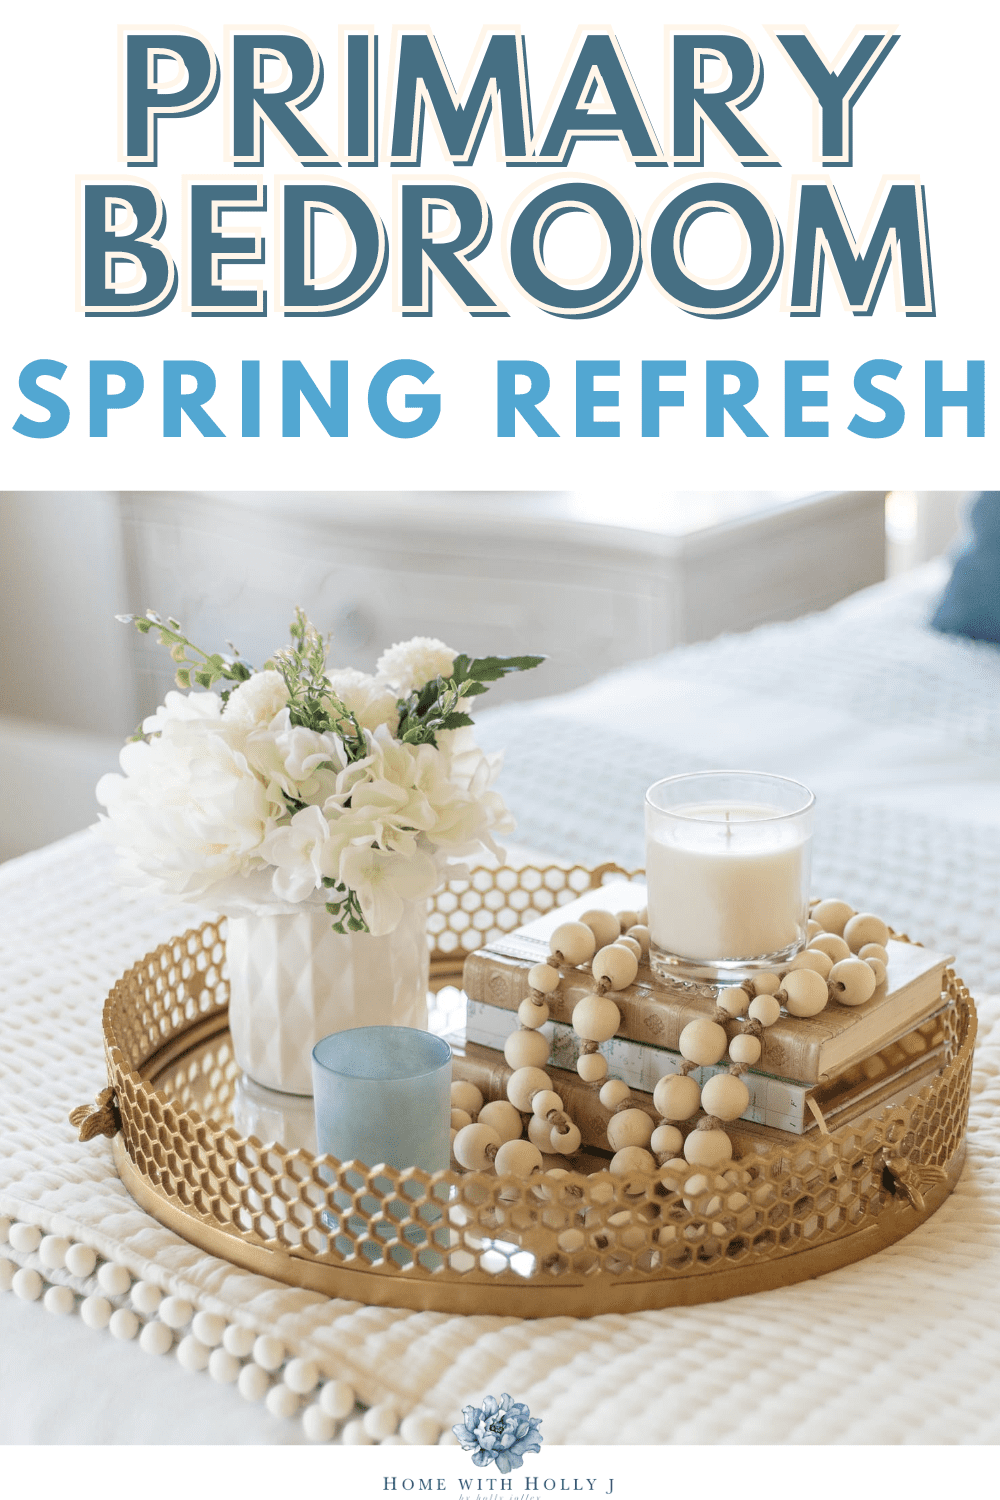 Refreshing the master bedroom for Spring can be a nice way to update your bedroom without spending a lot of money or time.